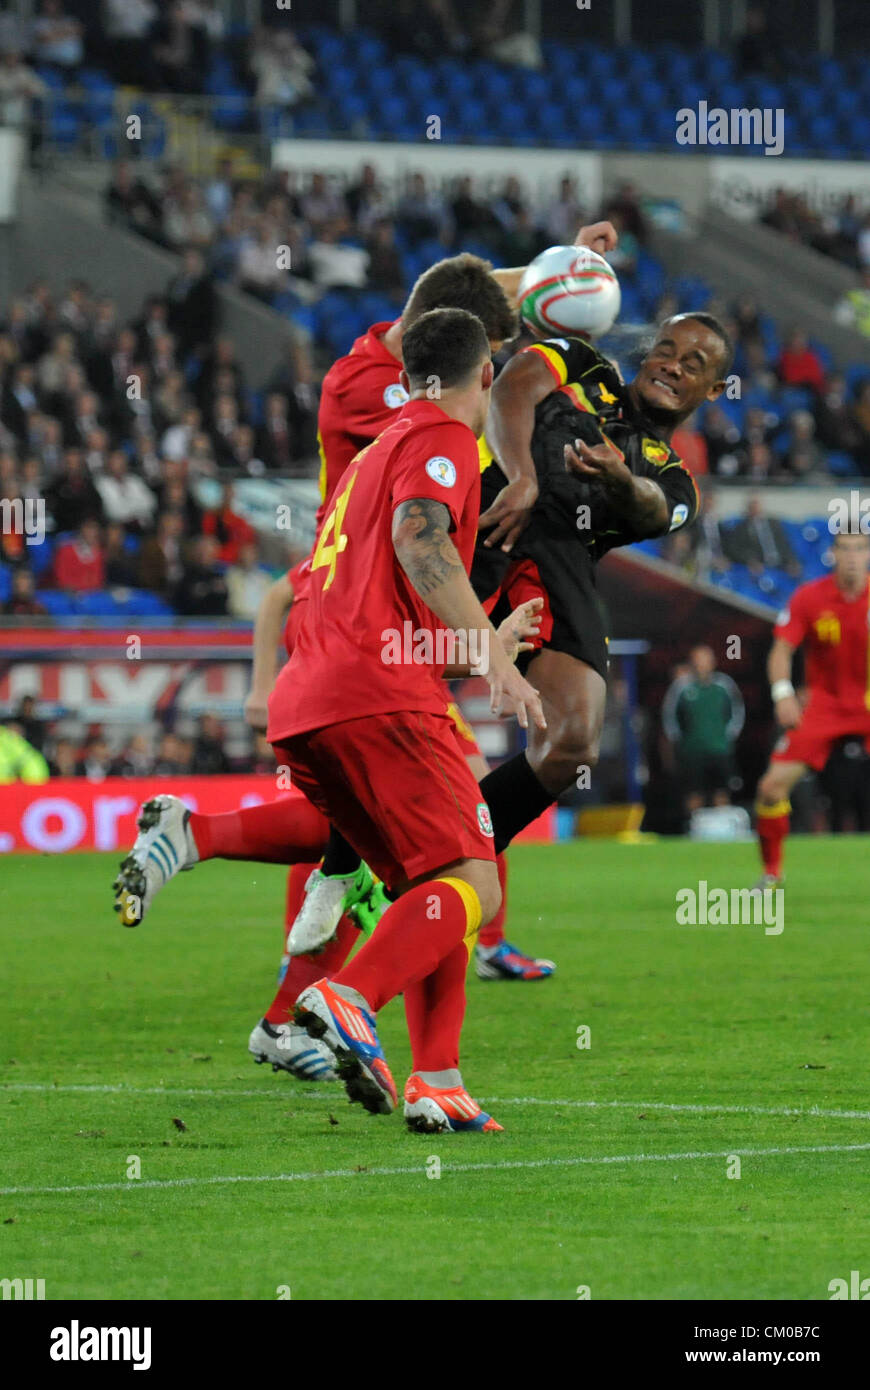 FIFA 2014 World Cup Qualifying Match - Wales v Belgium at the Cardiff City Stadium : Vincent Kompany of Belgium is beaten to the high ball by Sam Vokes of Wales. Stock Photo